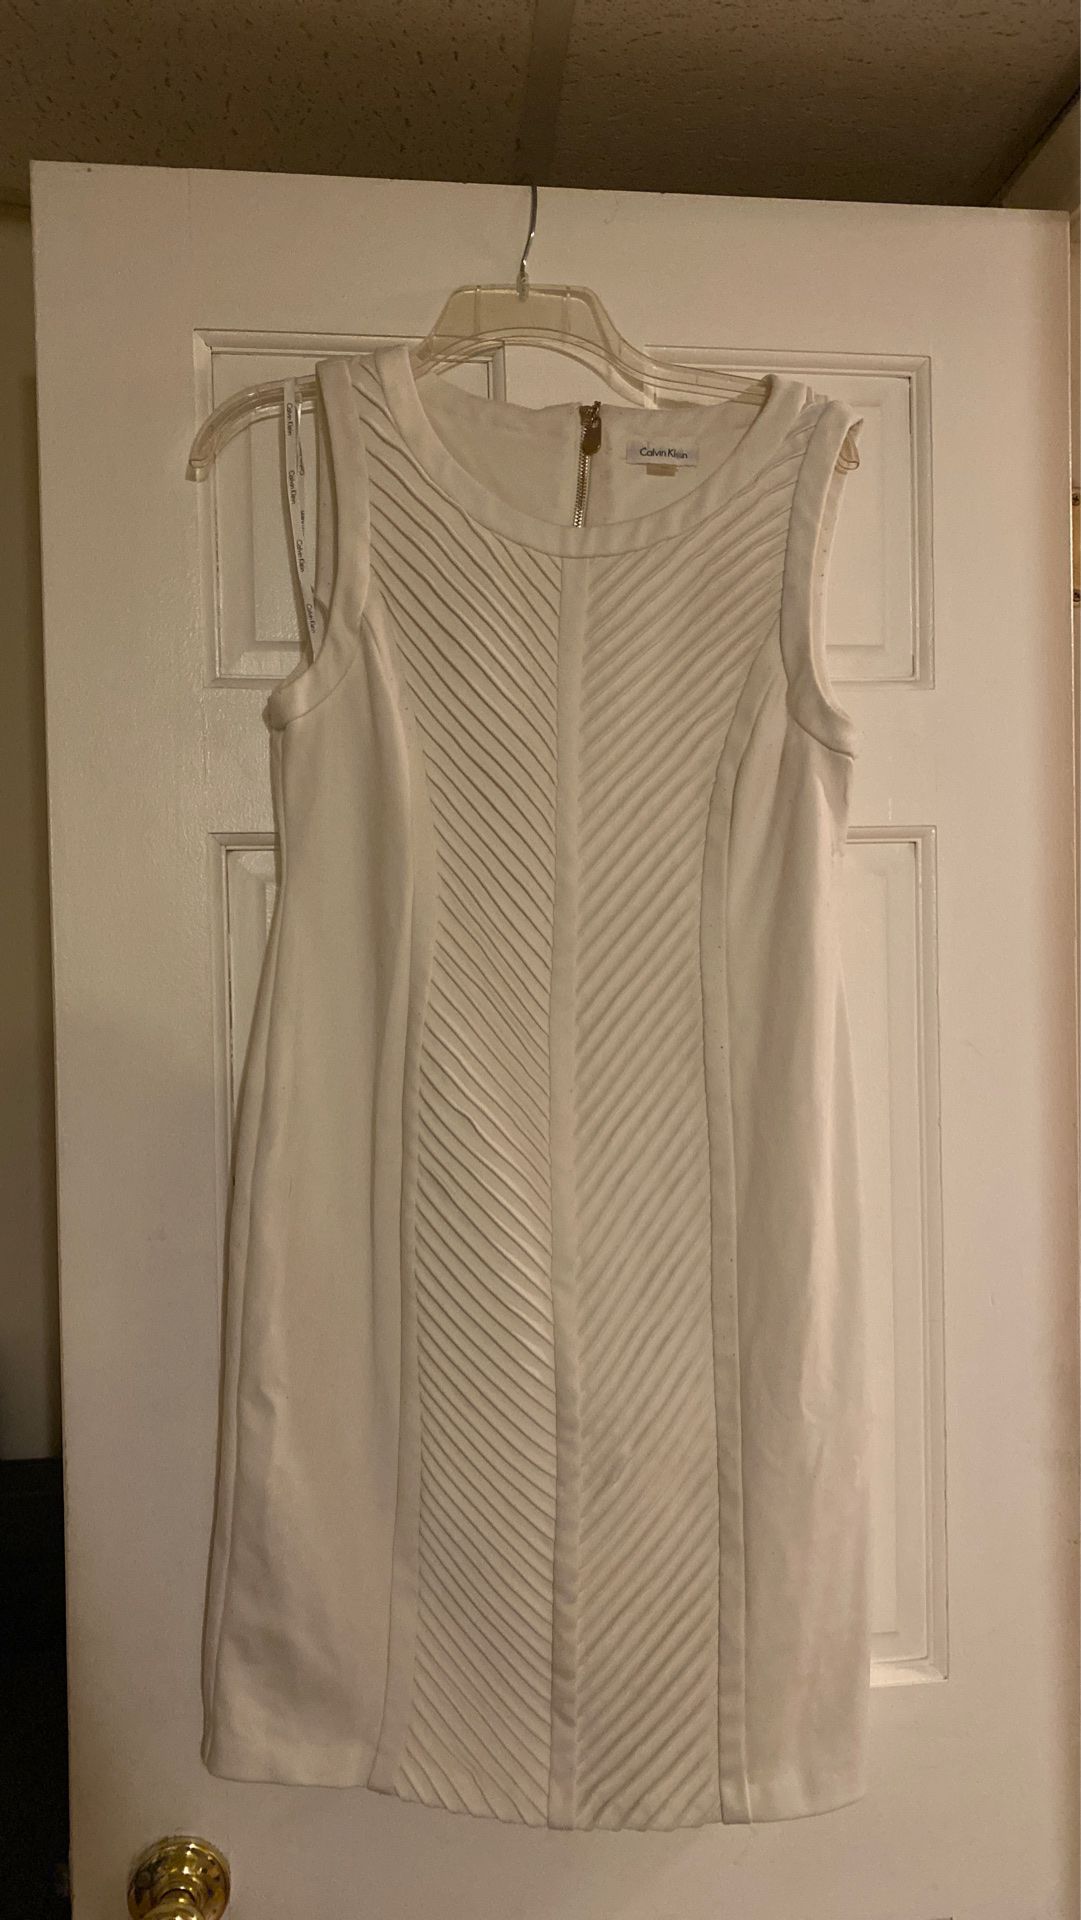 Cream color Calvin Klein dress with gold zipper in the back size 10-12